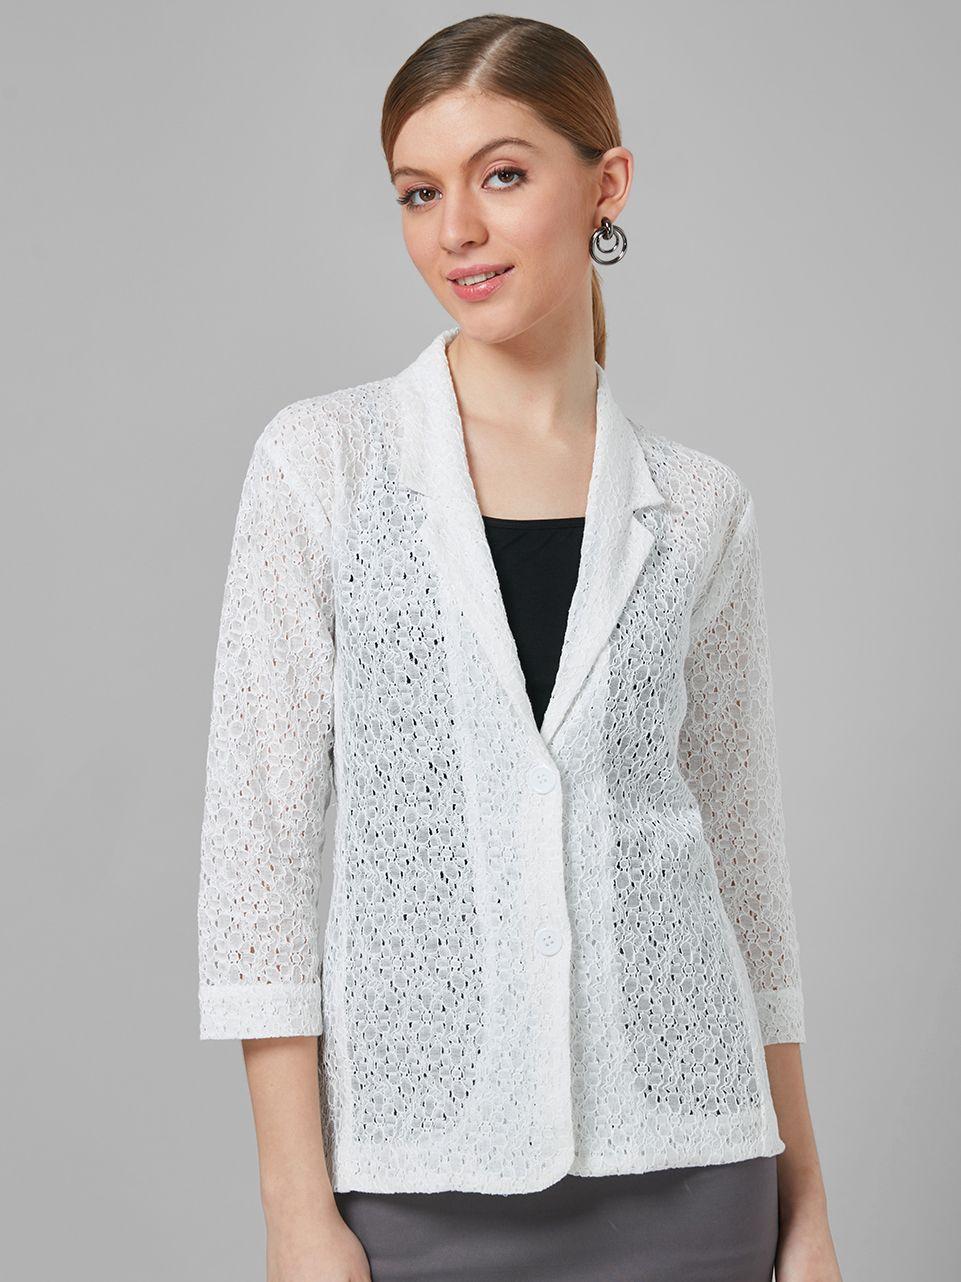 Style Quotient Women Self Design Floral Lace Tailored Smart Casual Jacket